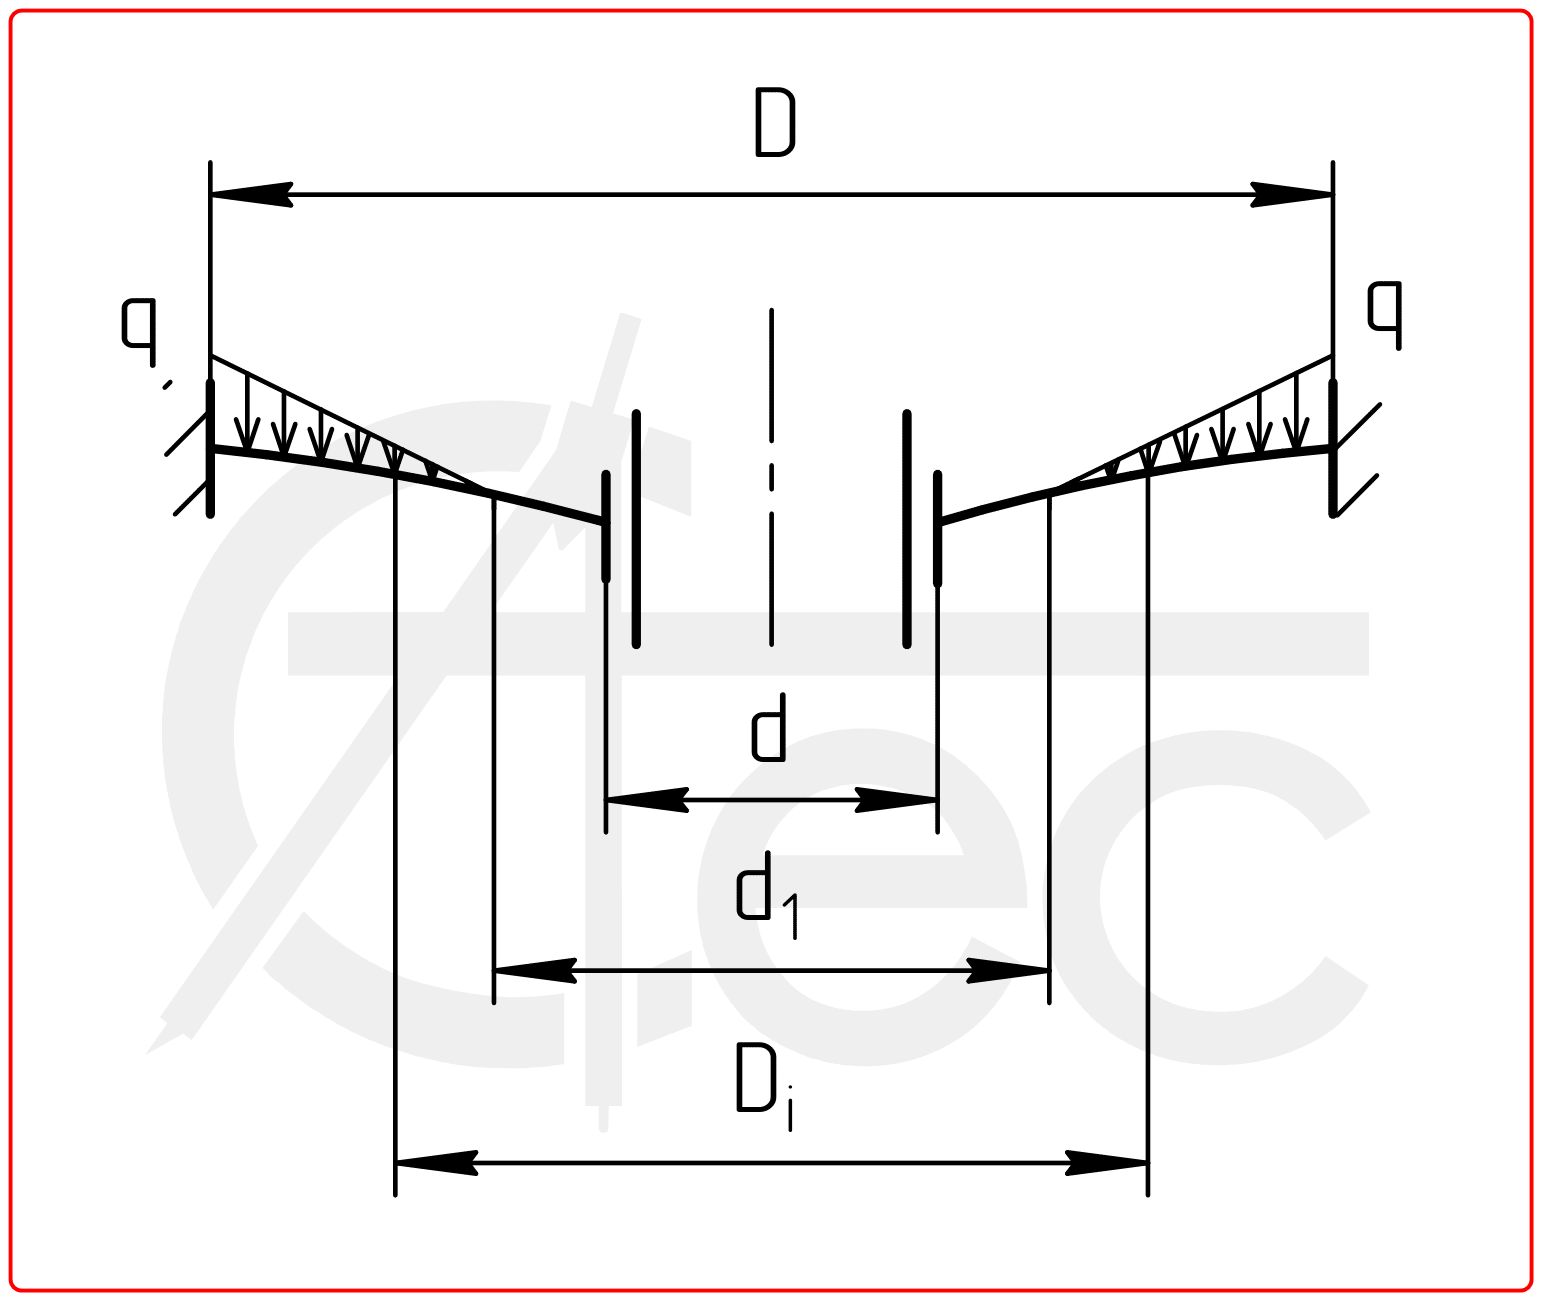 Circle plate with outer edge fixed and inner edge slided under distributed load